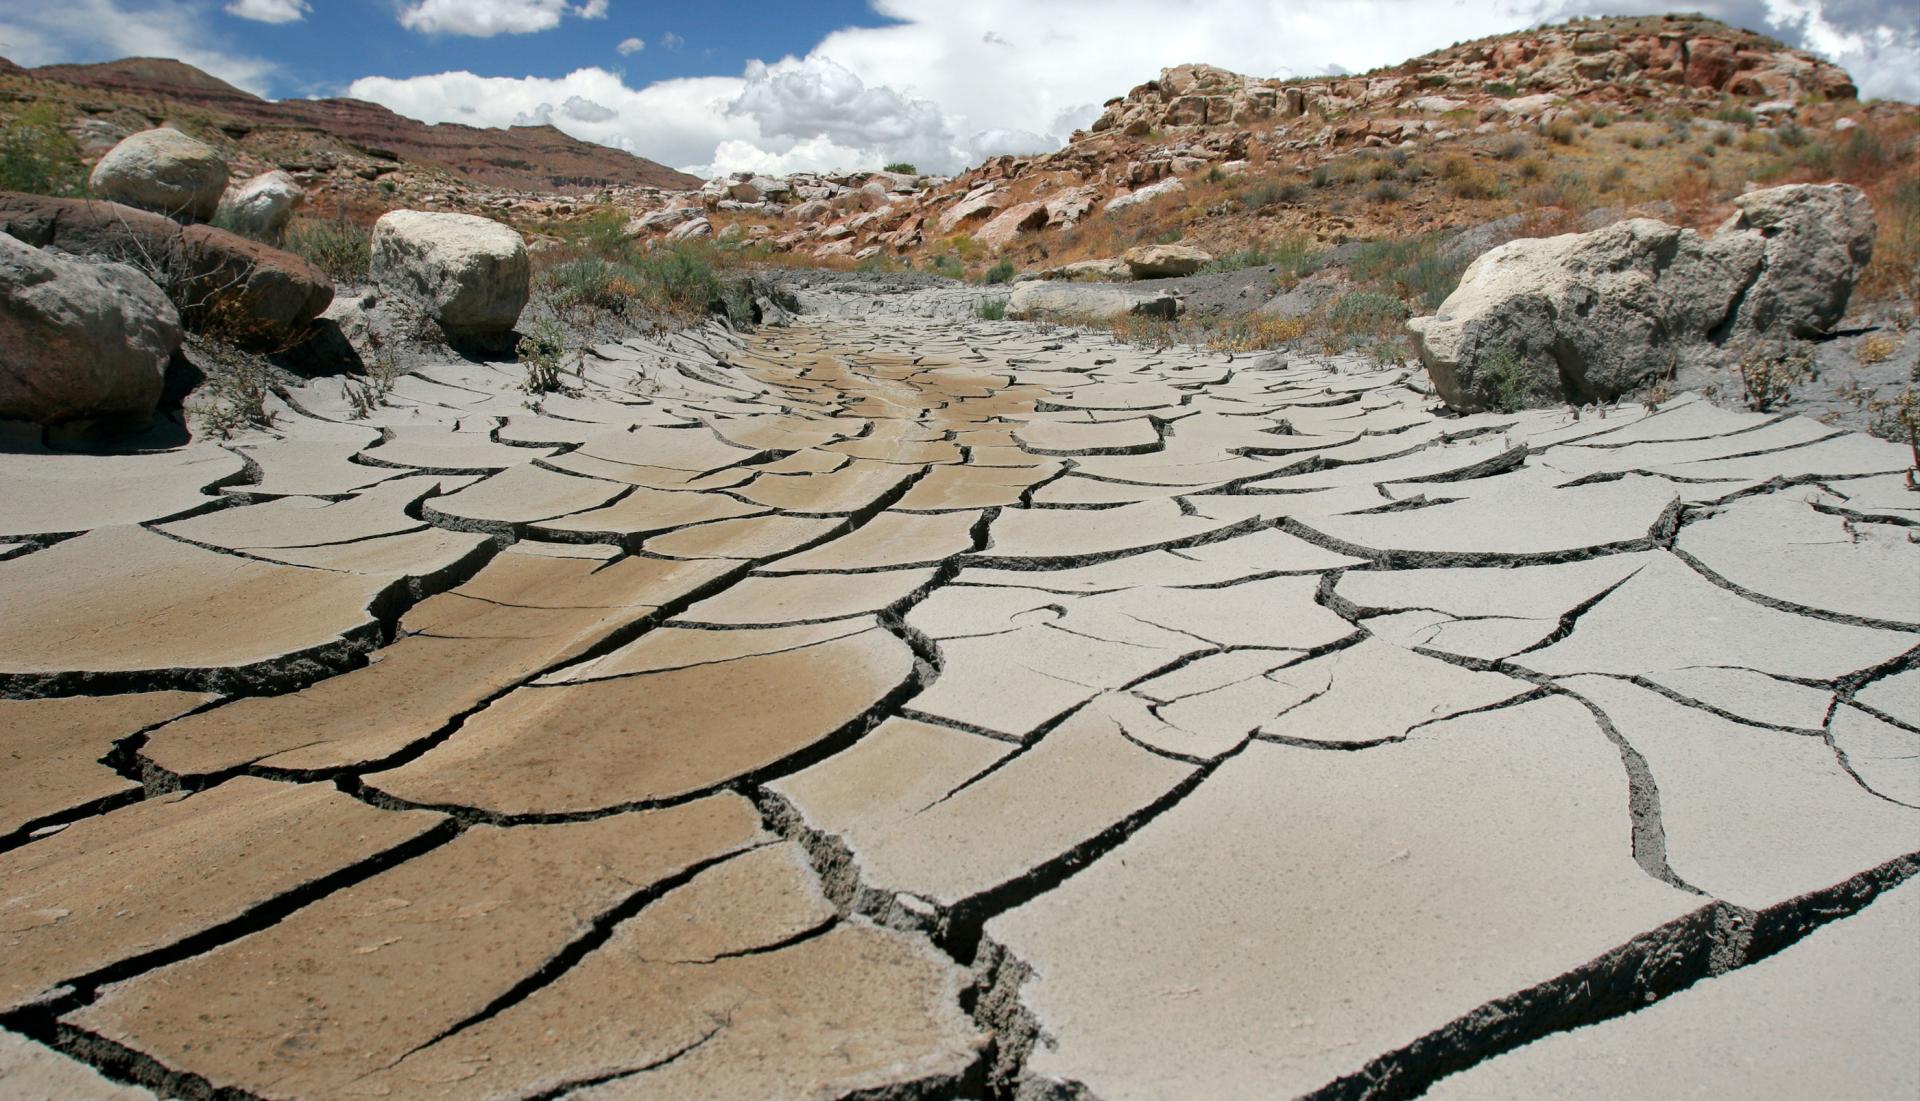 A dry river with cracked soil in Arizona